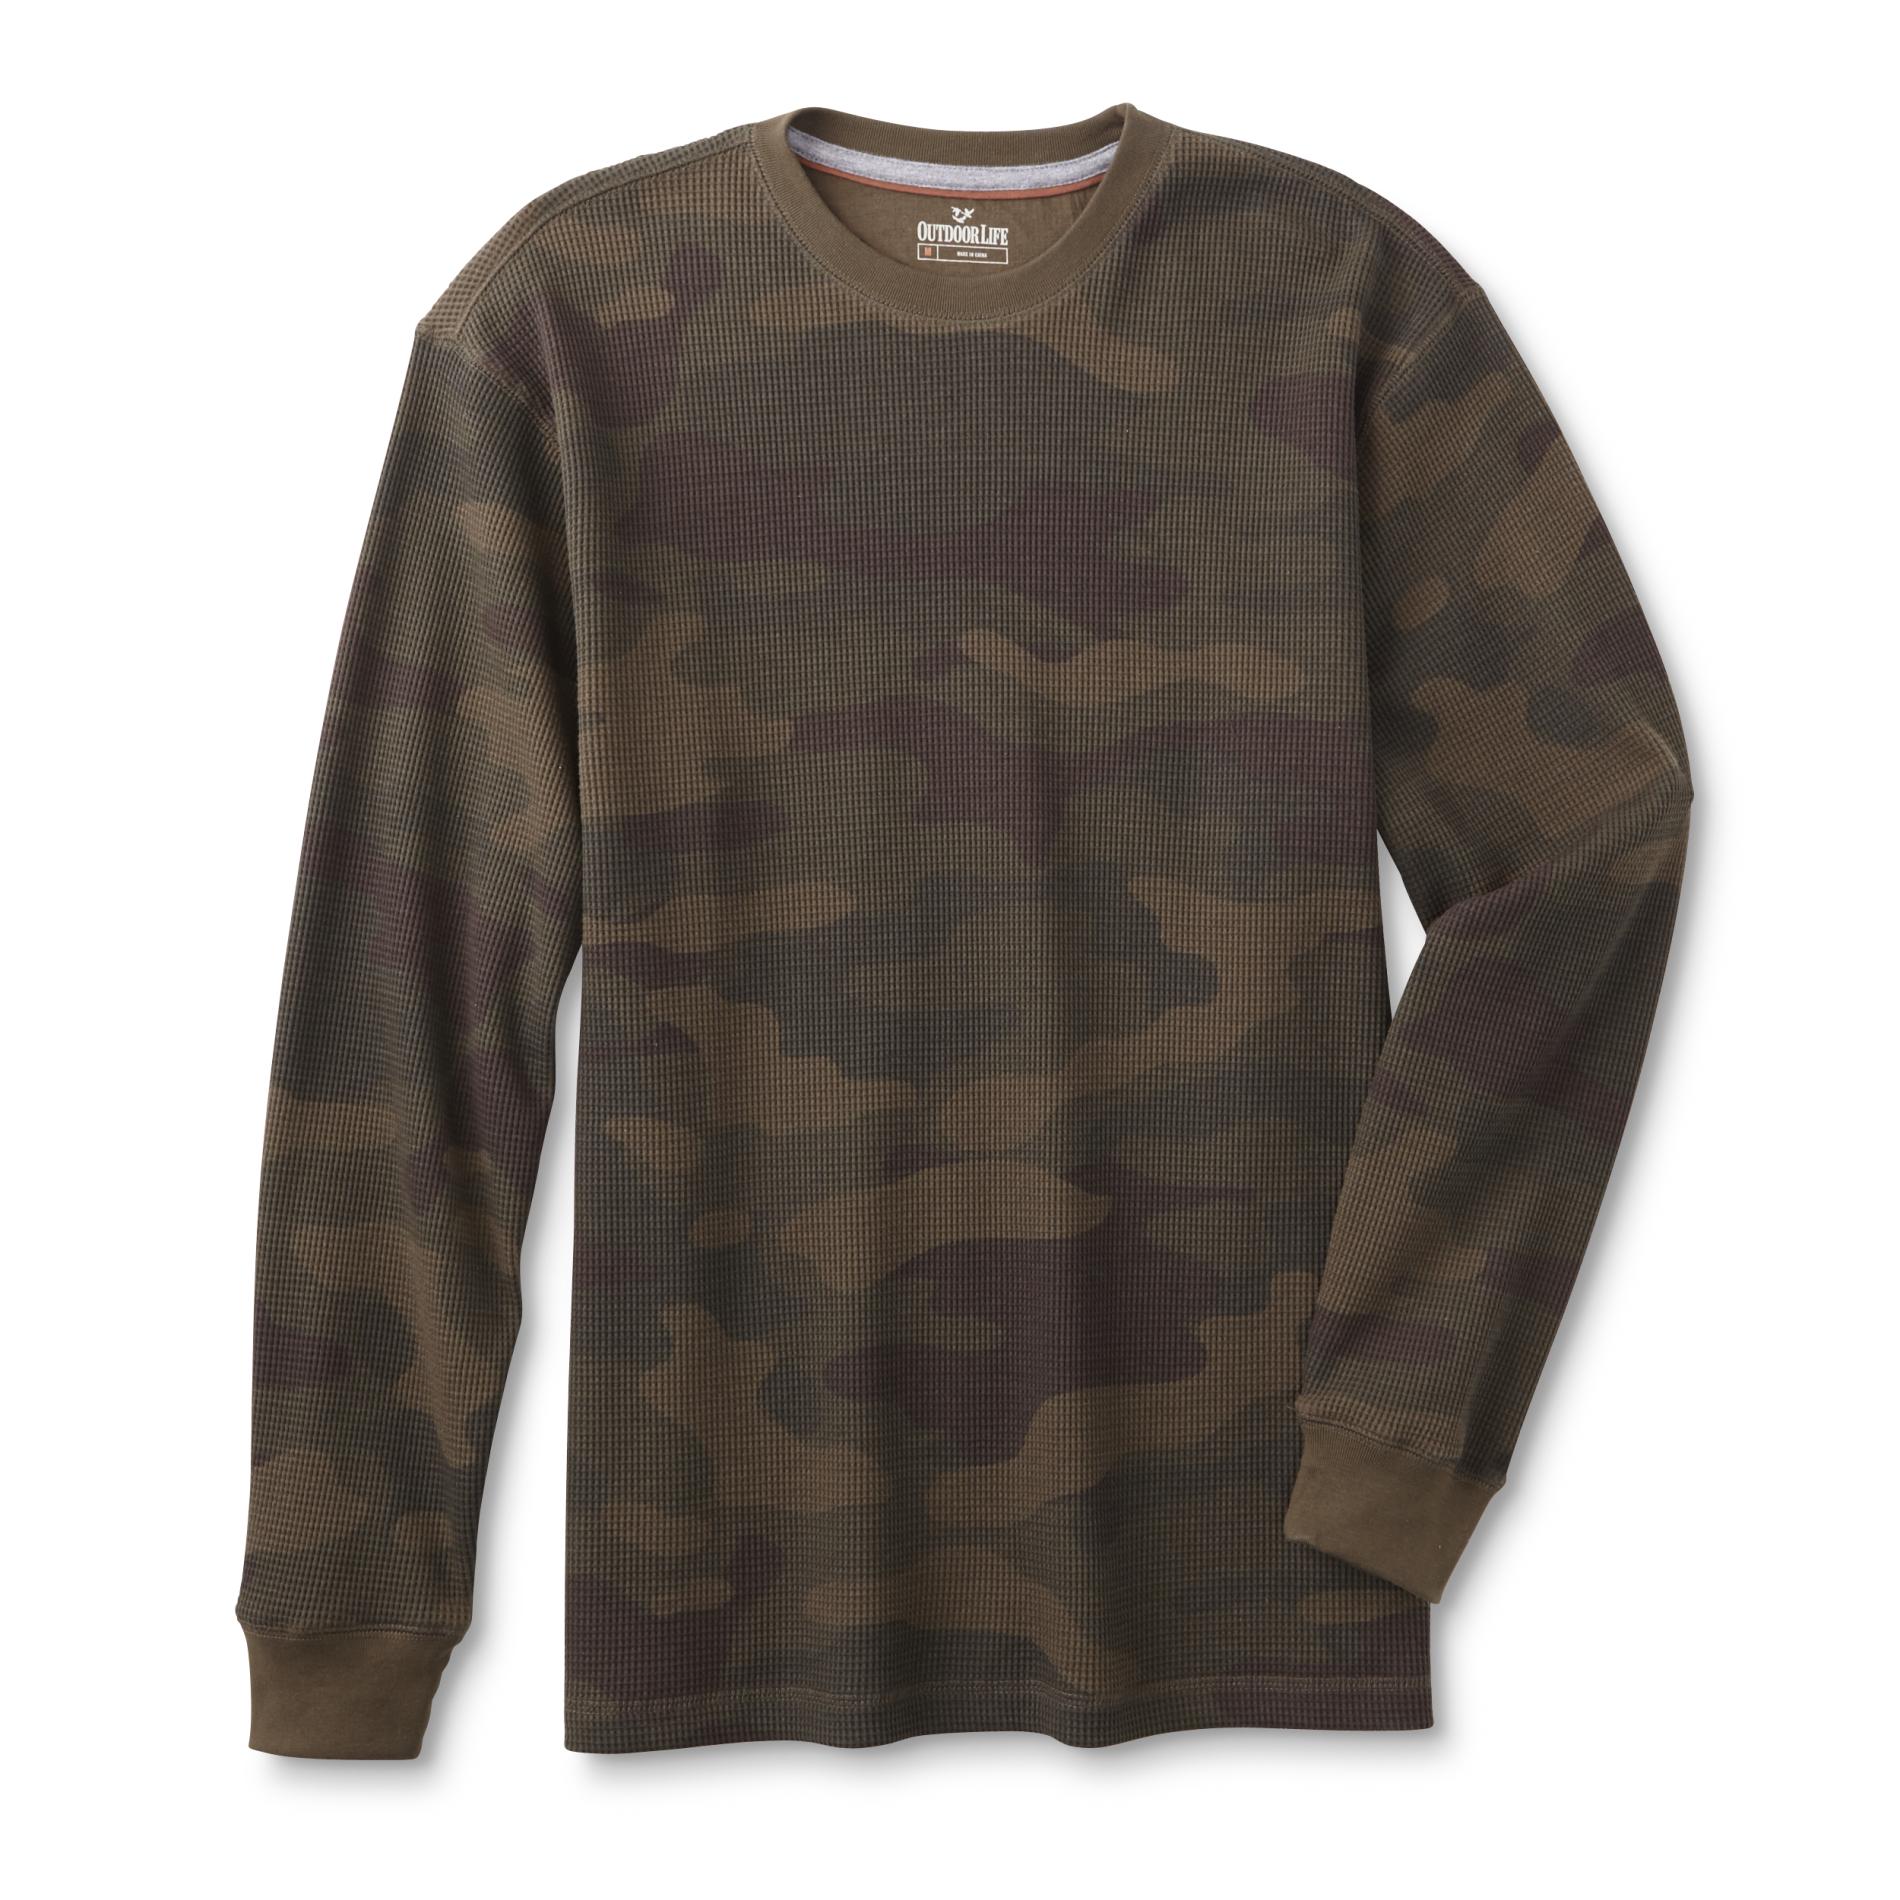 Outdoor Life&reg; Men's Thermal Shirt - Camouflage